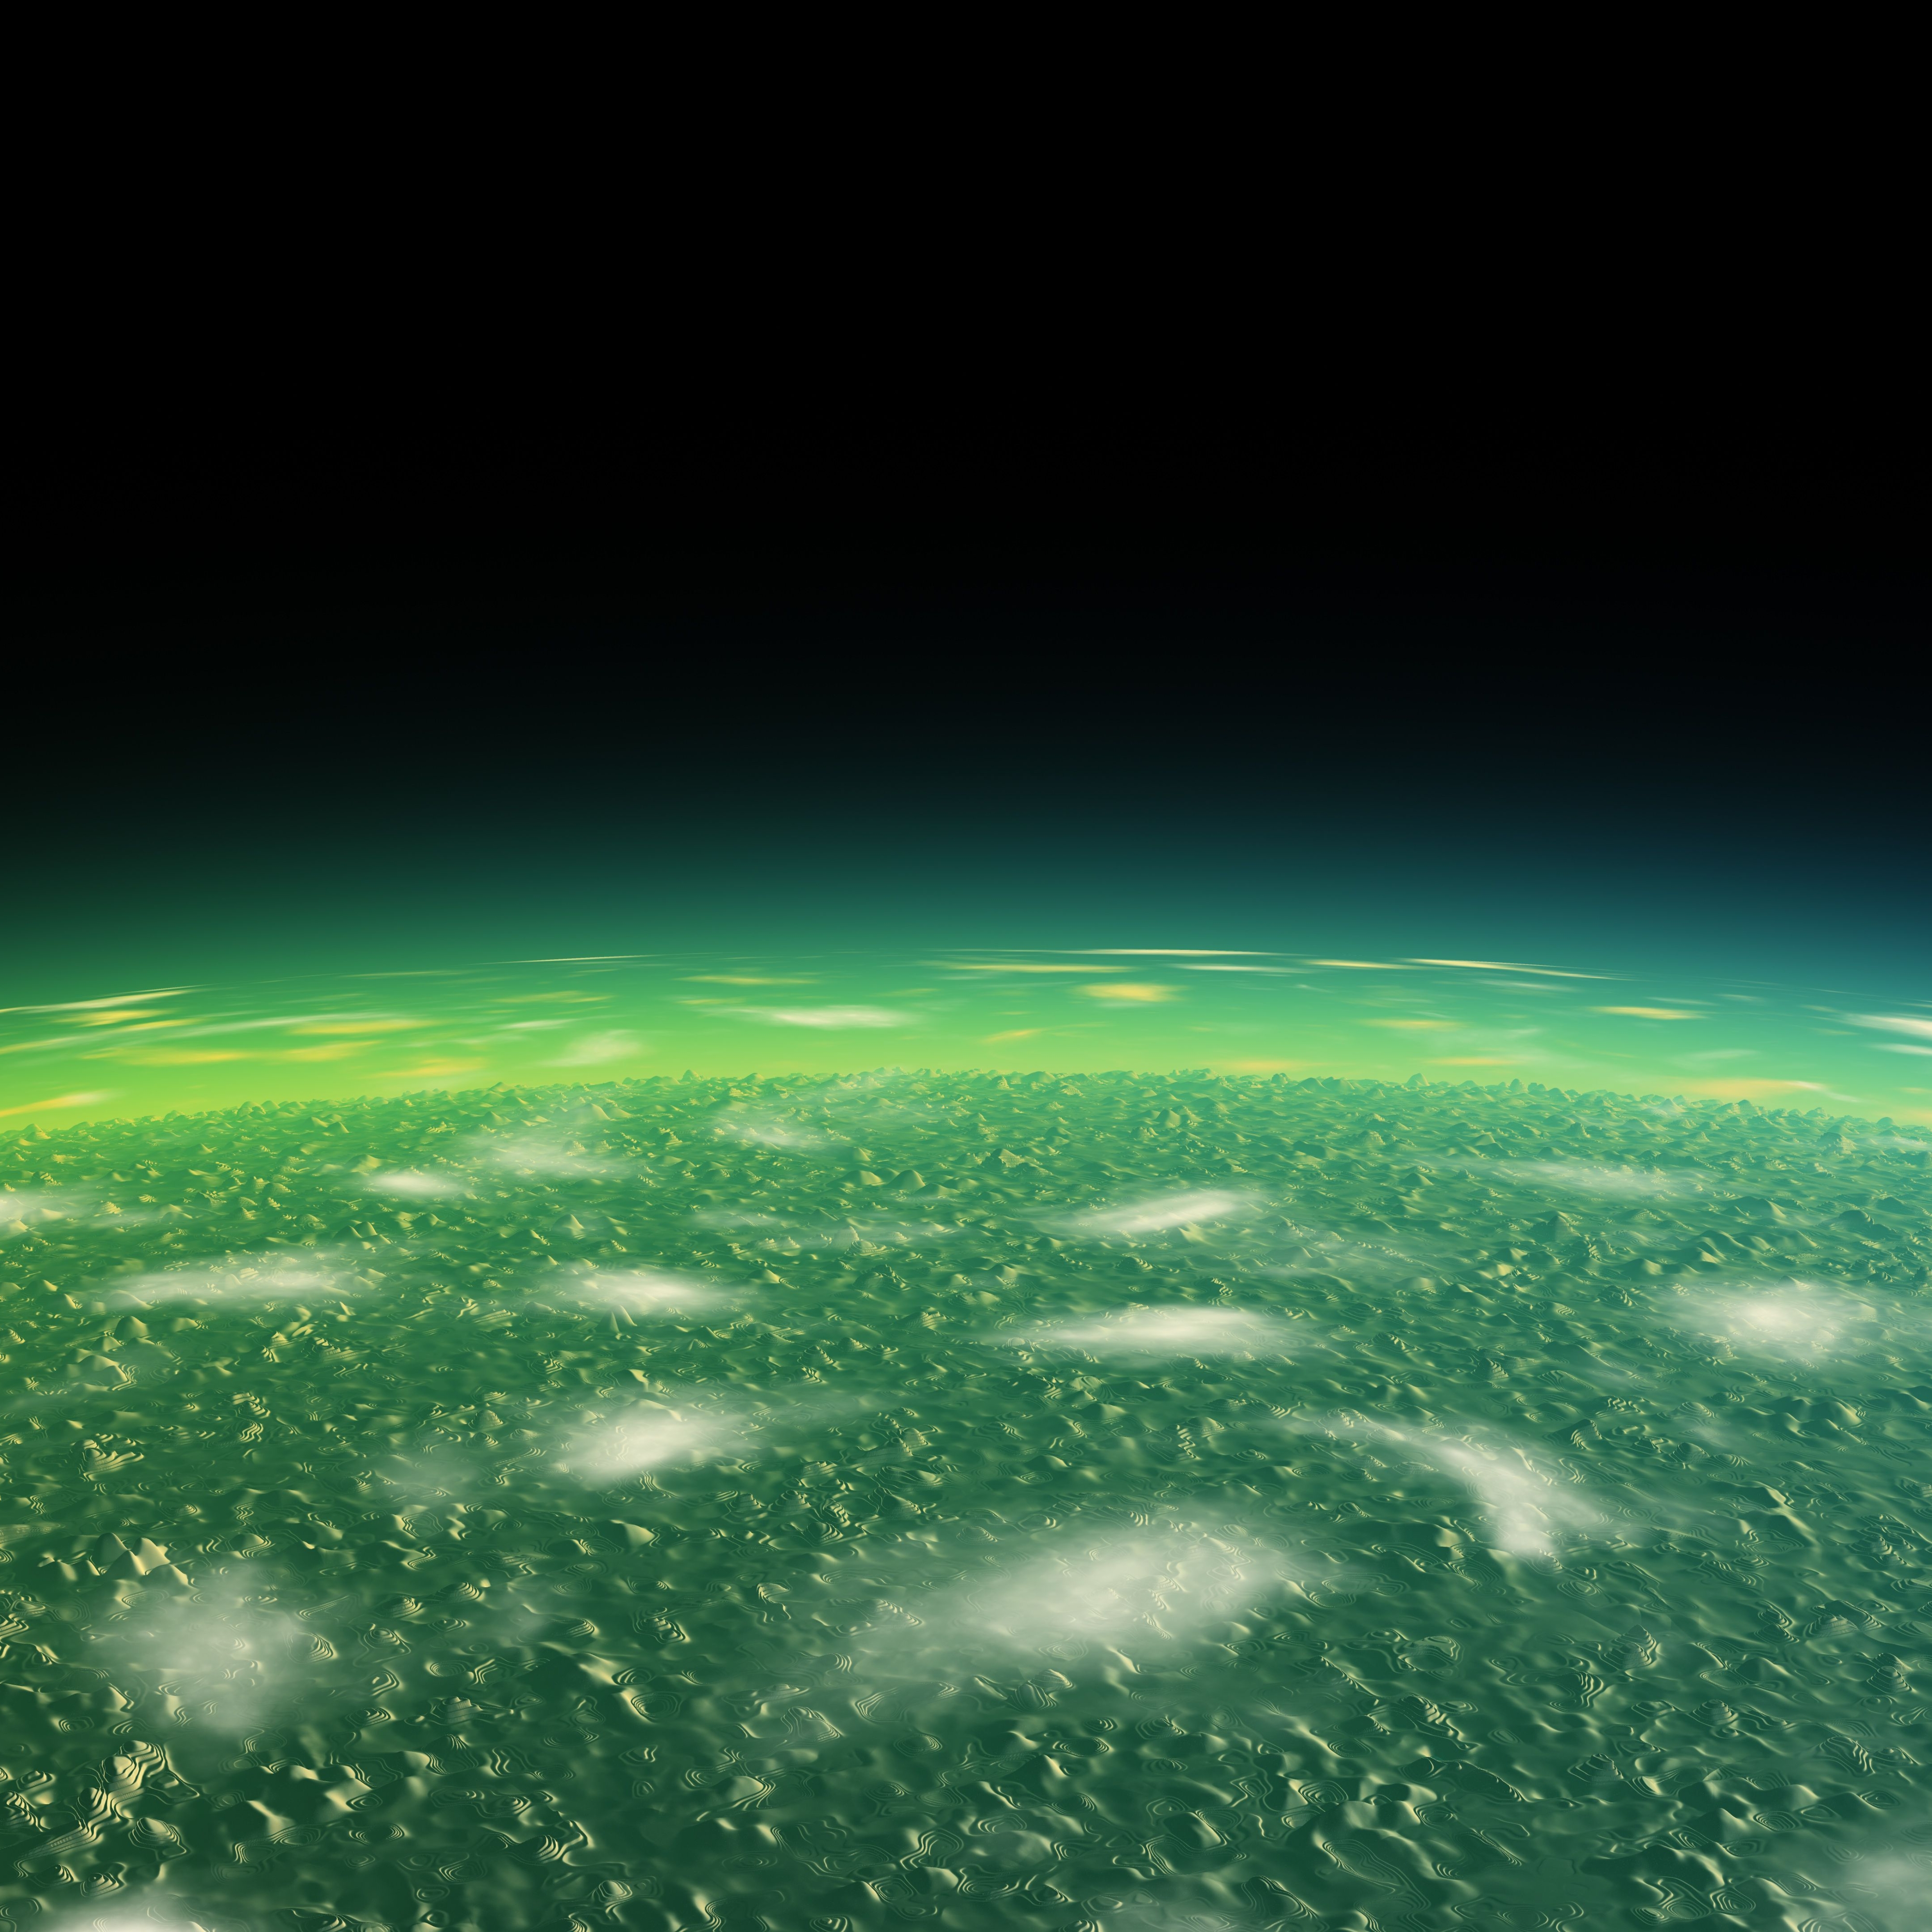 The Green planet